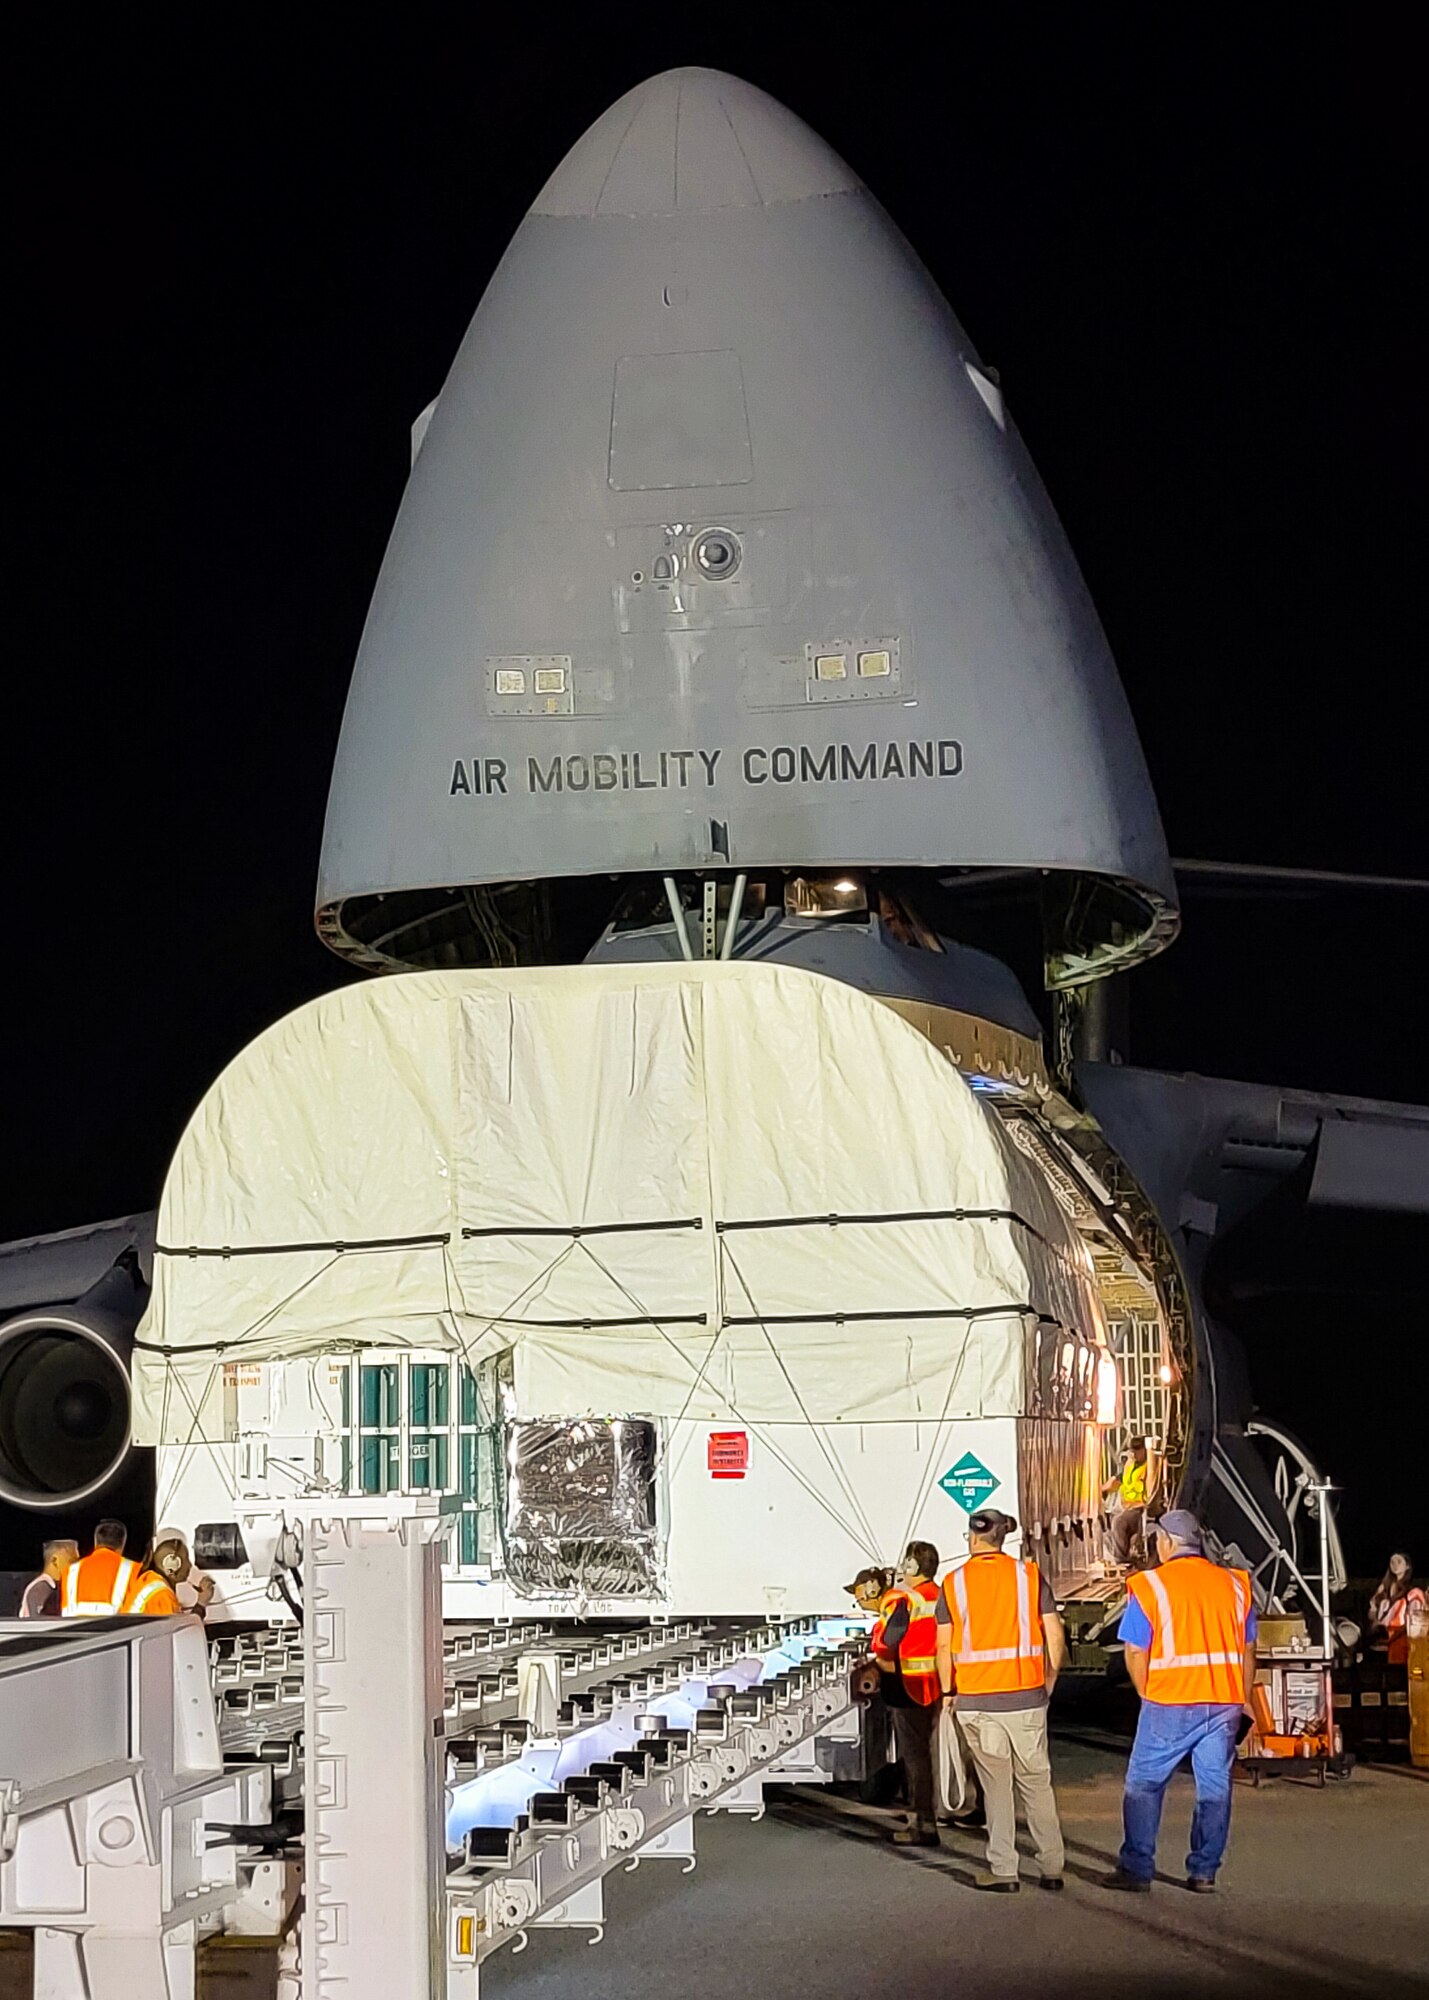 A large military aircraft is being loaded by a large white container.